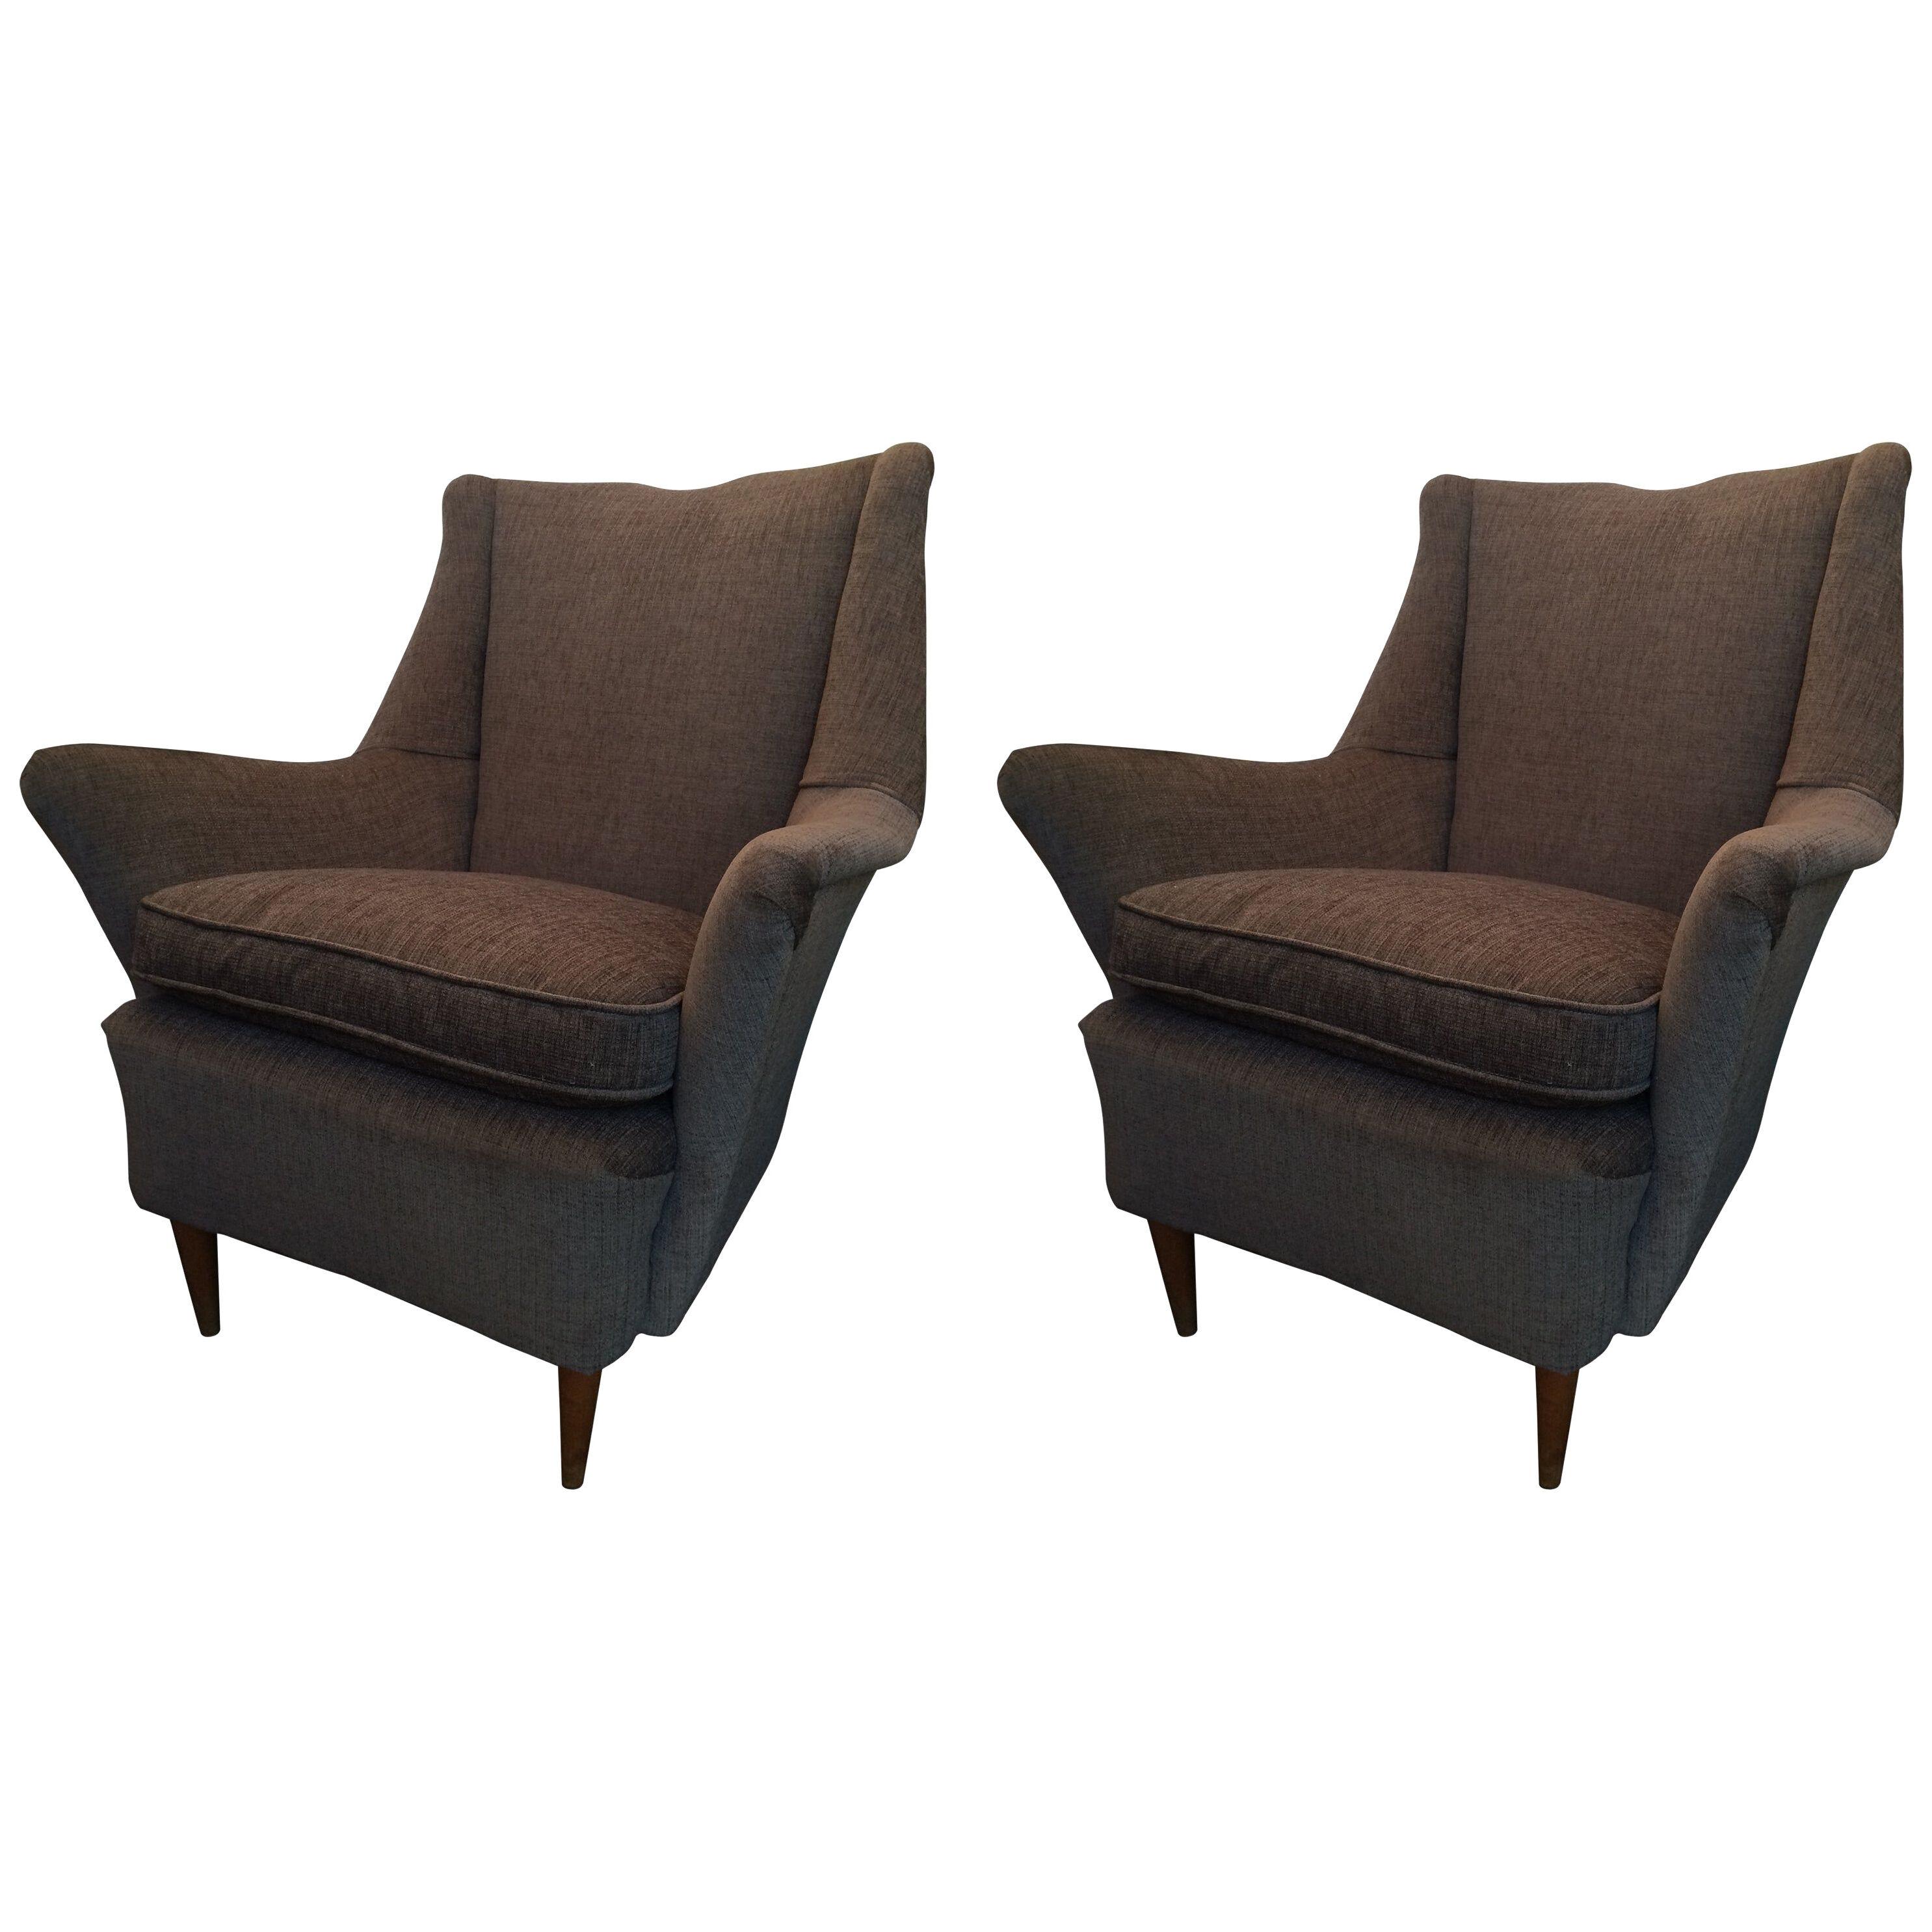 Pair of Vintage Armchairs in Gio Ponti Style